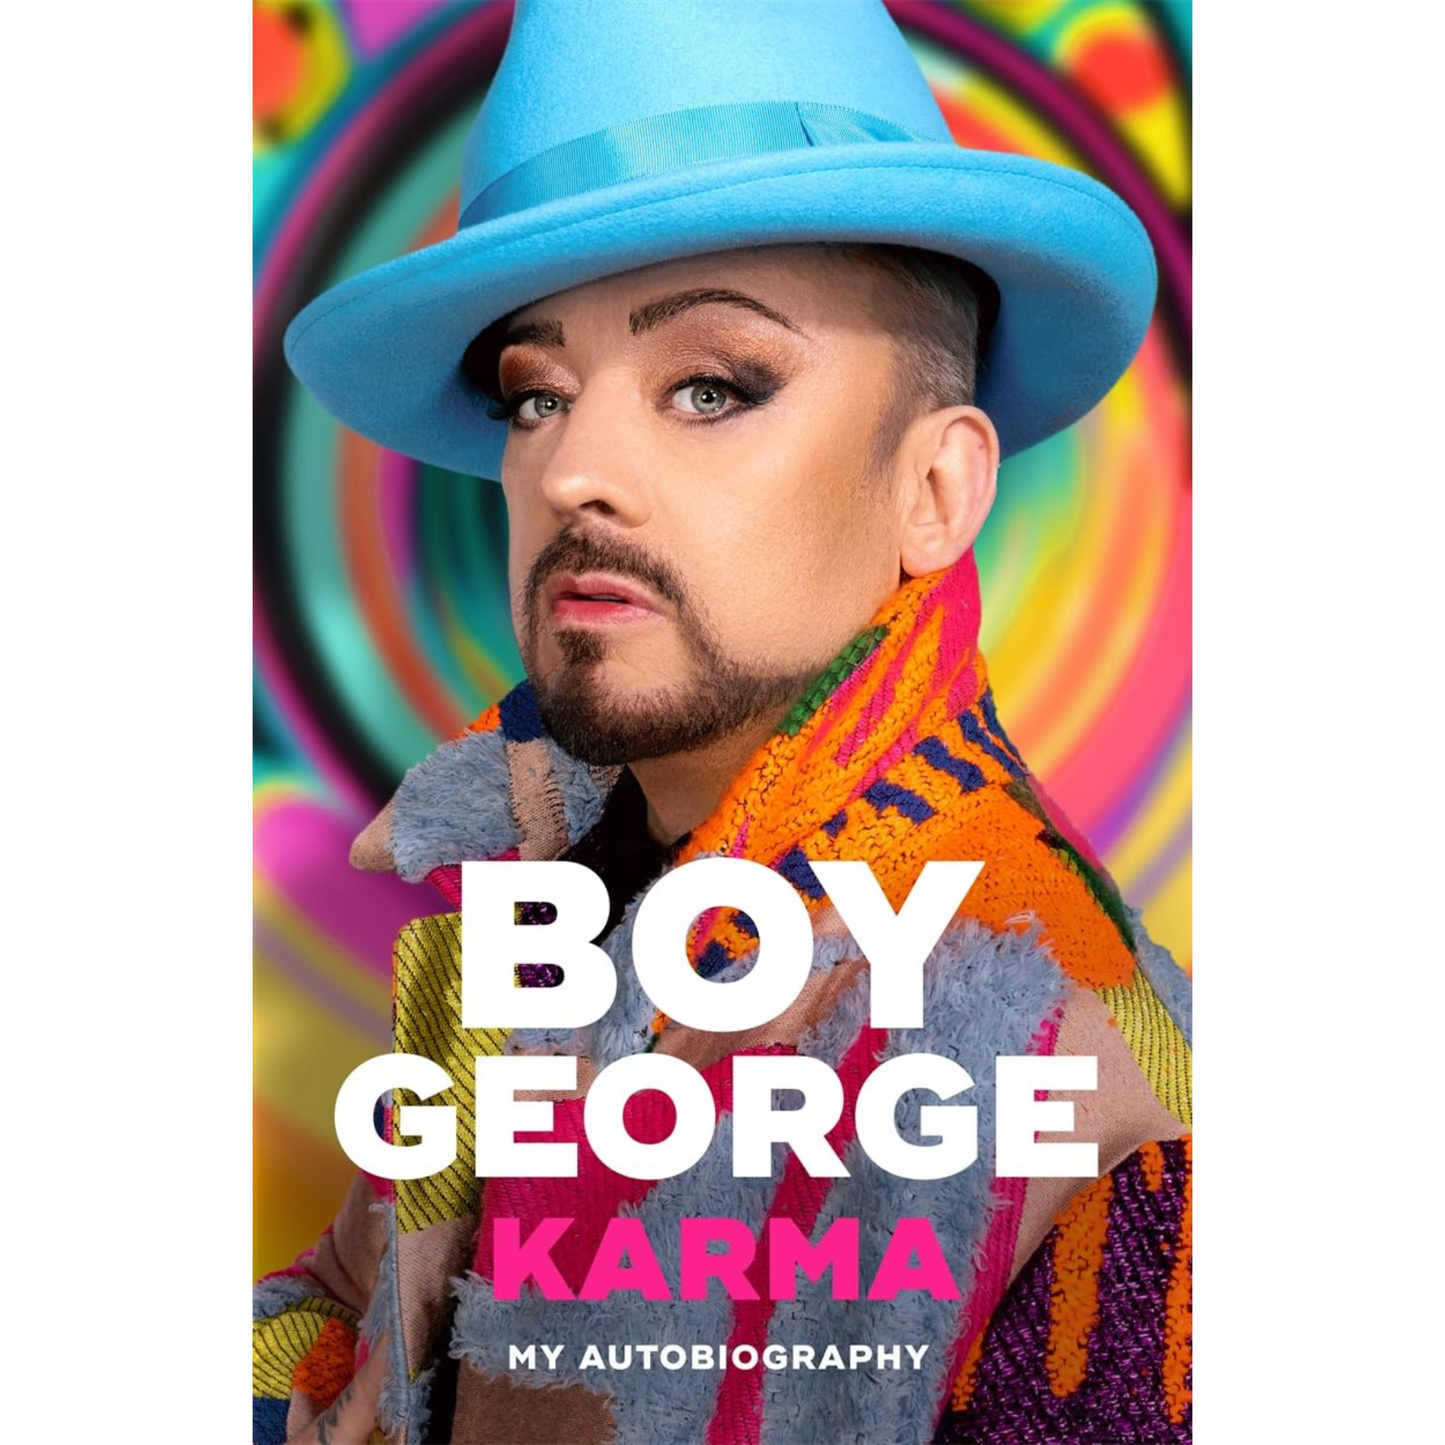 Colourful cover with portrait of Boy George in blue hat.